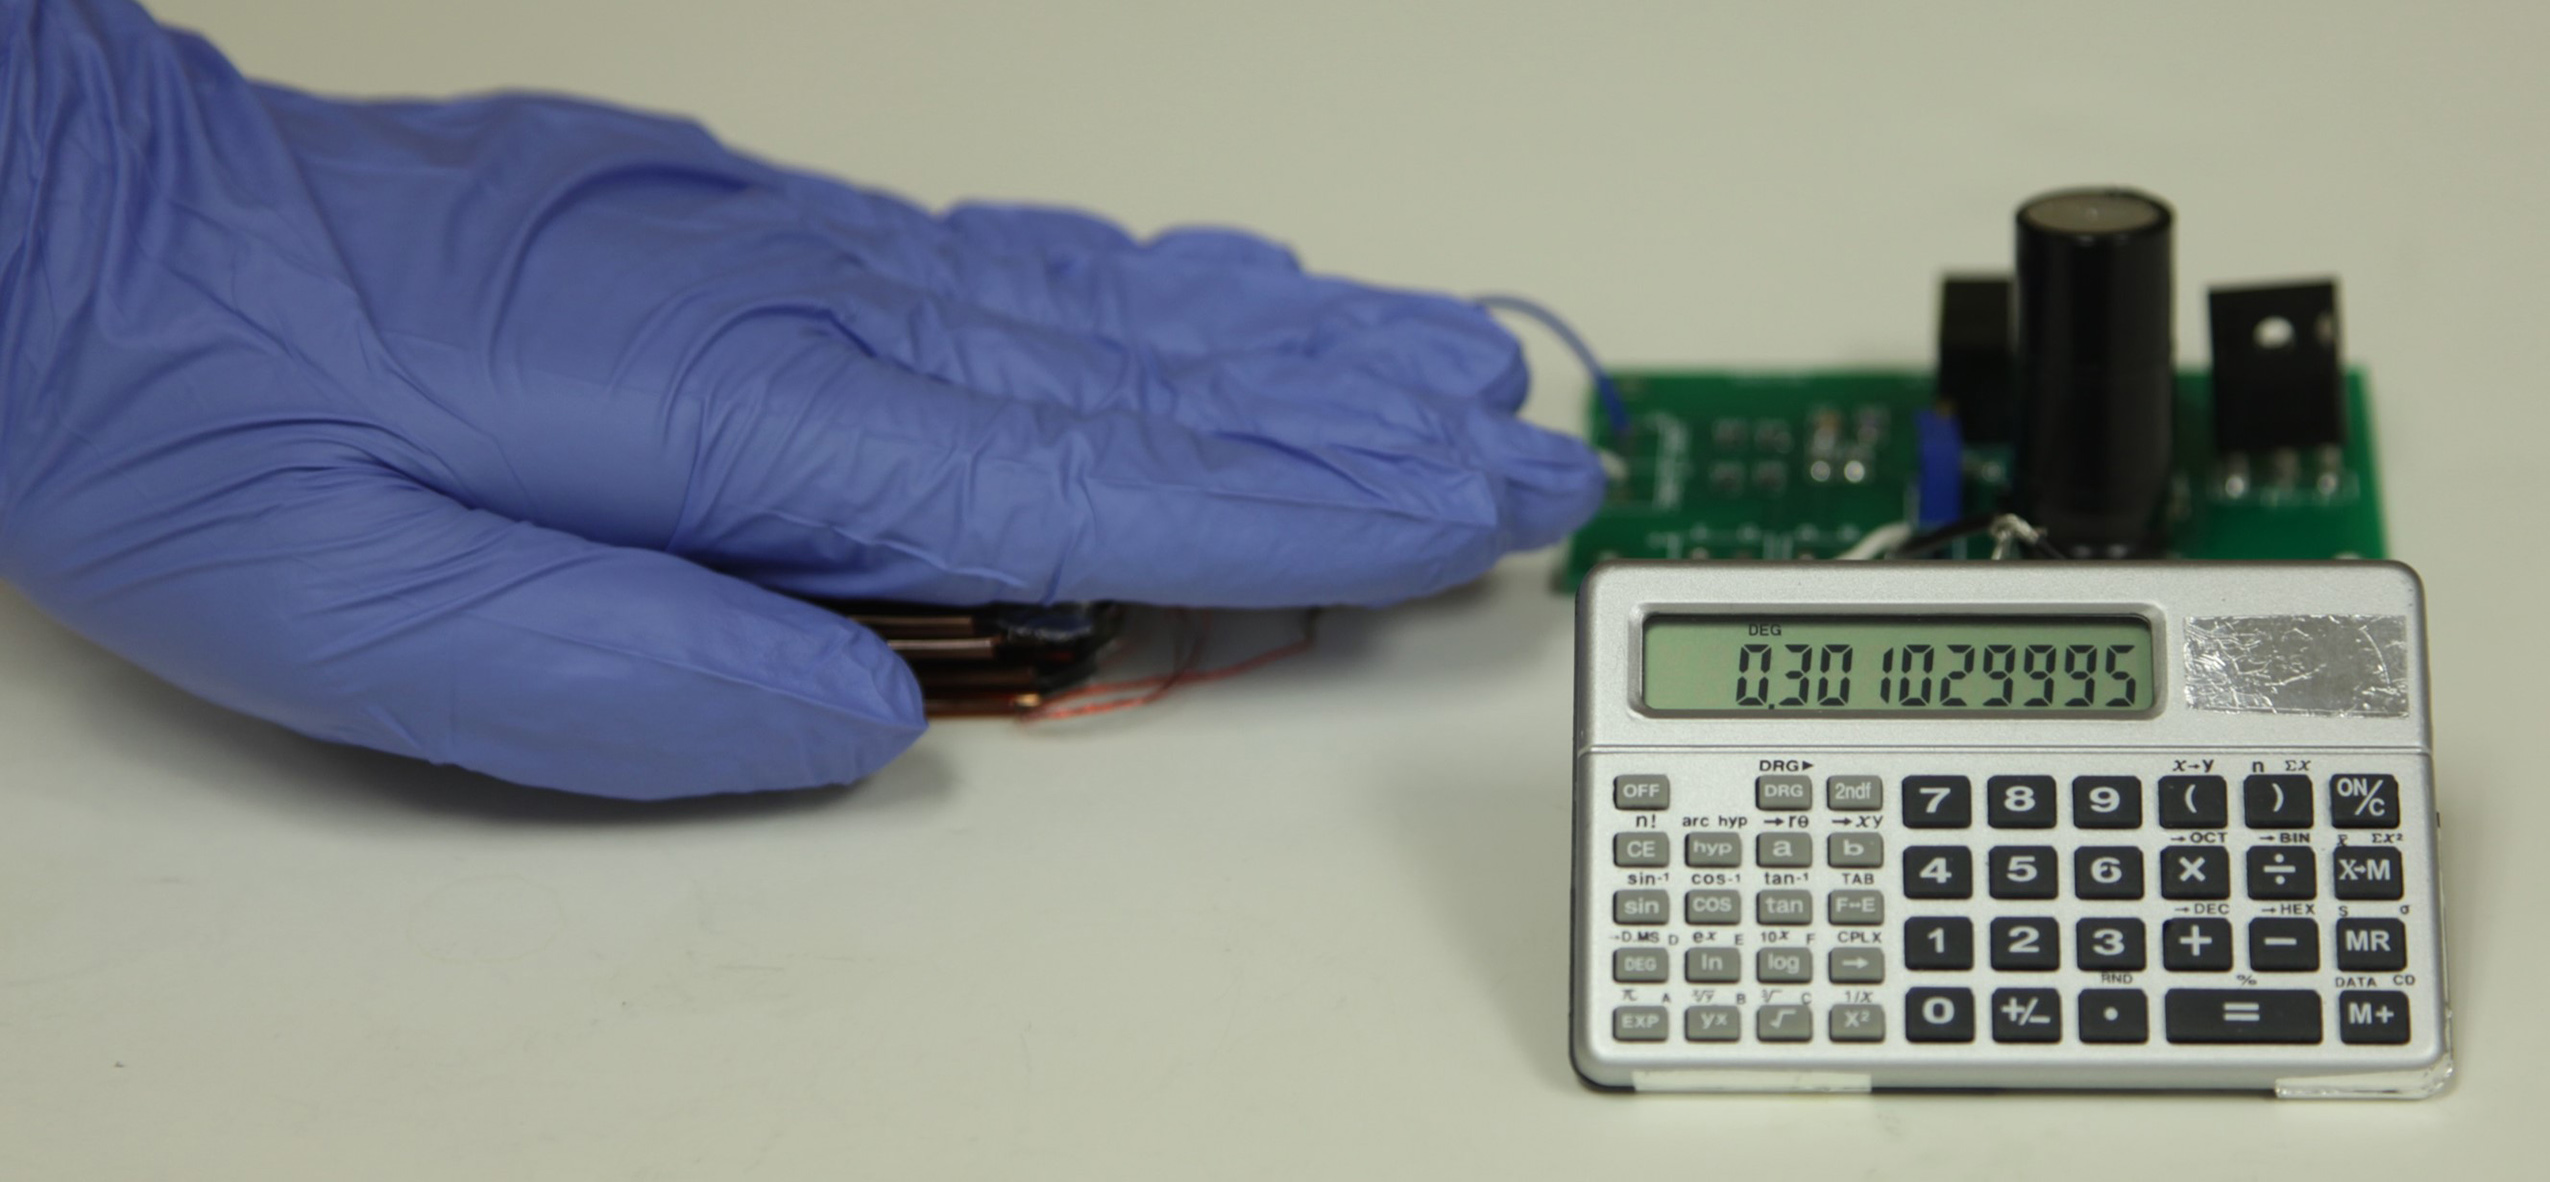 With this triboelectric nanogenerator and two-stage power management and storage system, finger tapping motion generates enough power to operate this scientific calculator. (Credit: Zhong Lin Wang Laboratory)